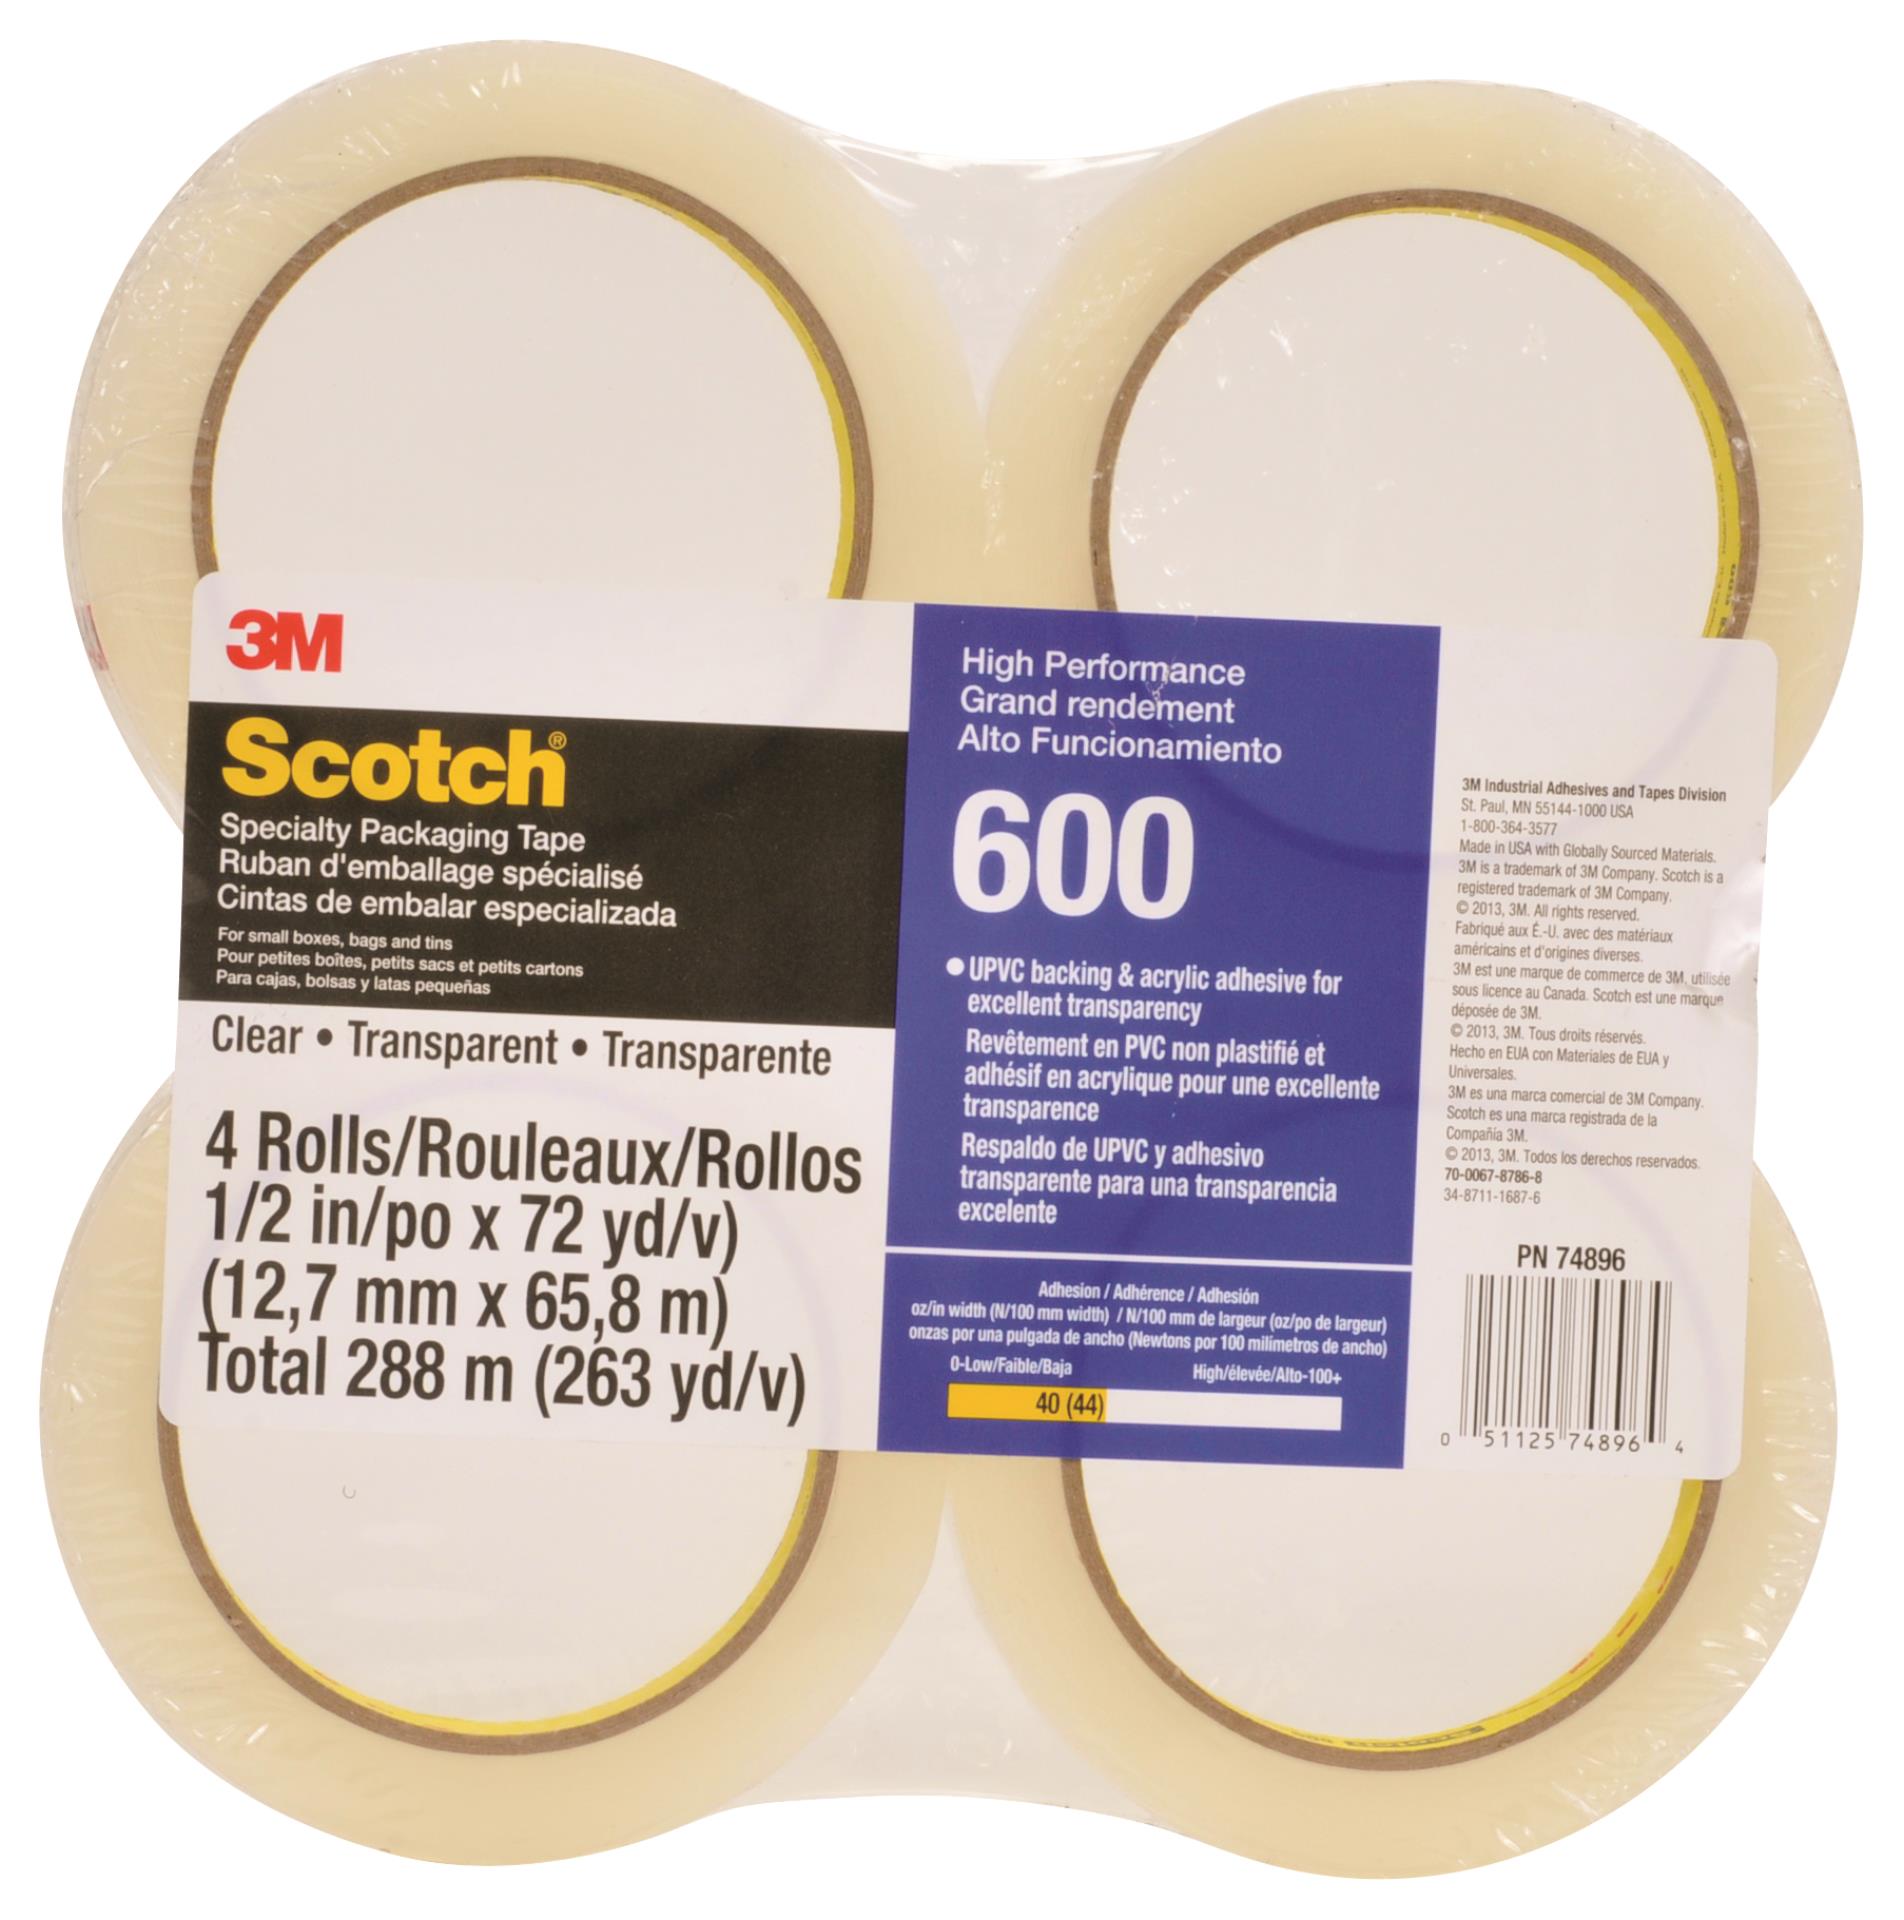 00051125748964 Scotch® Light Duty Packaging Tape 600 Clear High Clarity,  1/2 in x 72 yd, 72/case (4 rls/pck 18 pcks/cs), Conveniently Packaged  Aircraft products 3M 9348883